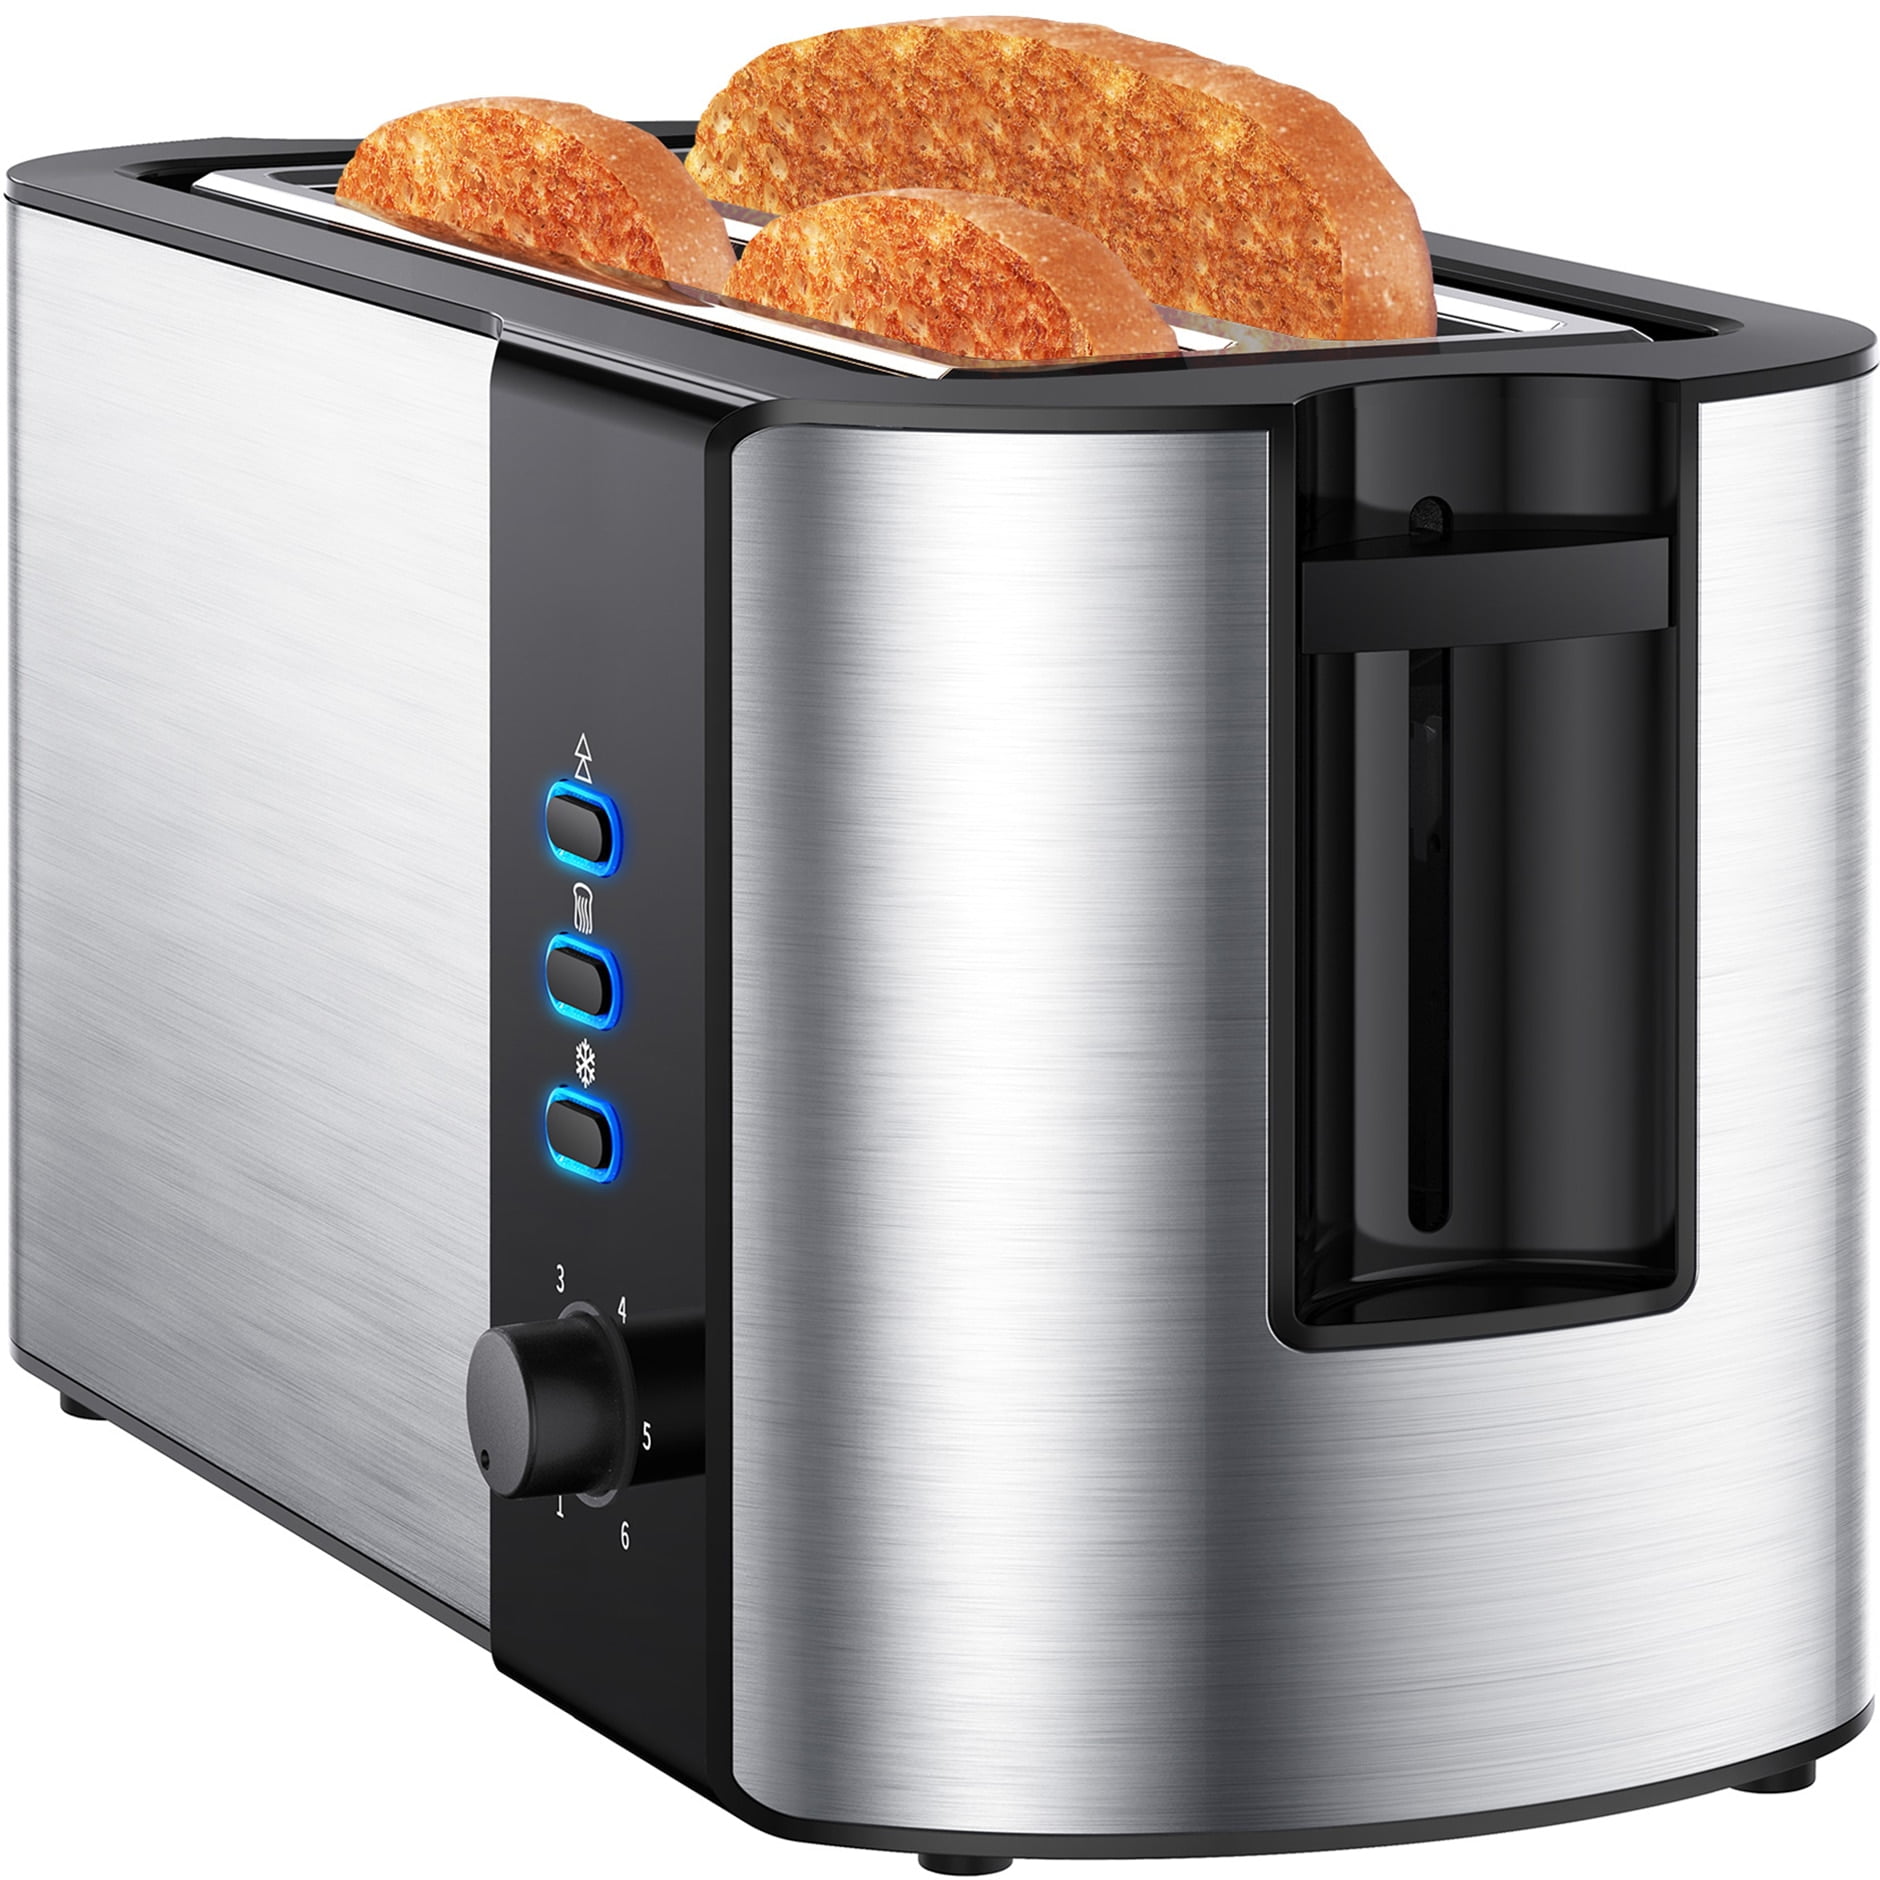 Toaster 4 Slice, Long Toaster with Warming Rack, 6 Browning Control, Reheat, Defrost, Compact Countertop Stainless Steel Toaster 4 Slice for Artisan Bread, Muffins, Croissants, Bun Walmart.com